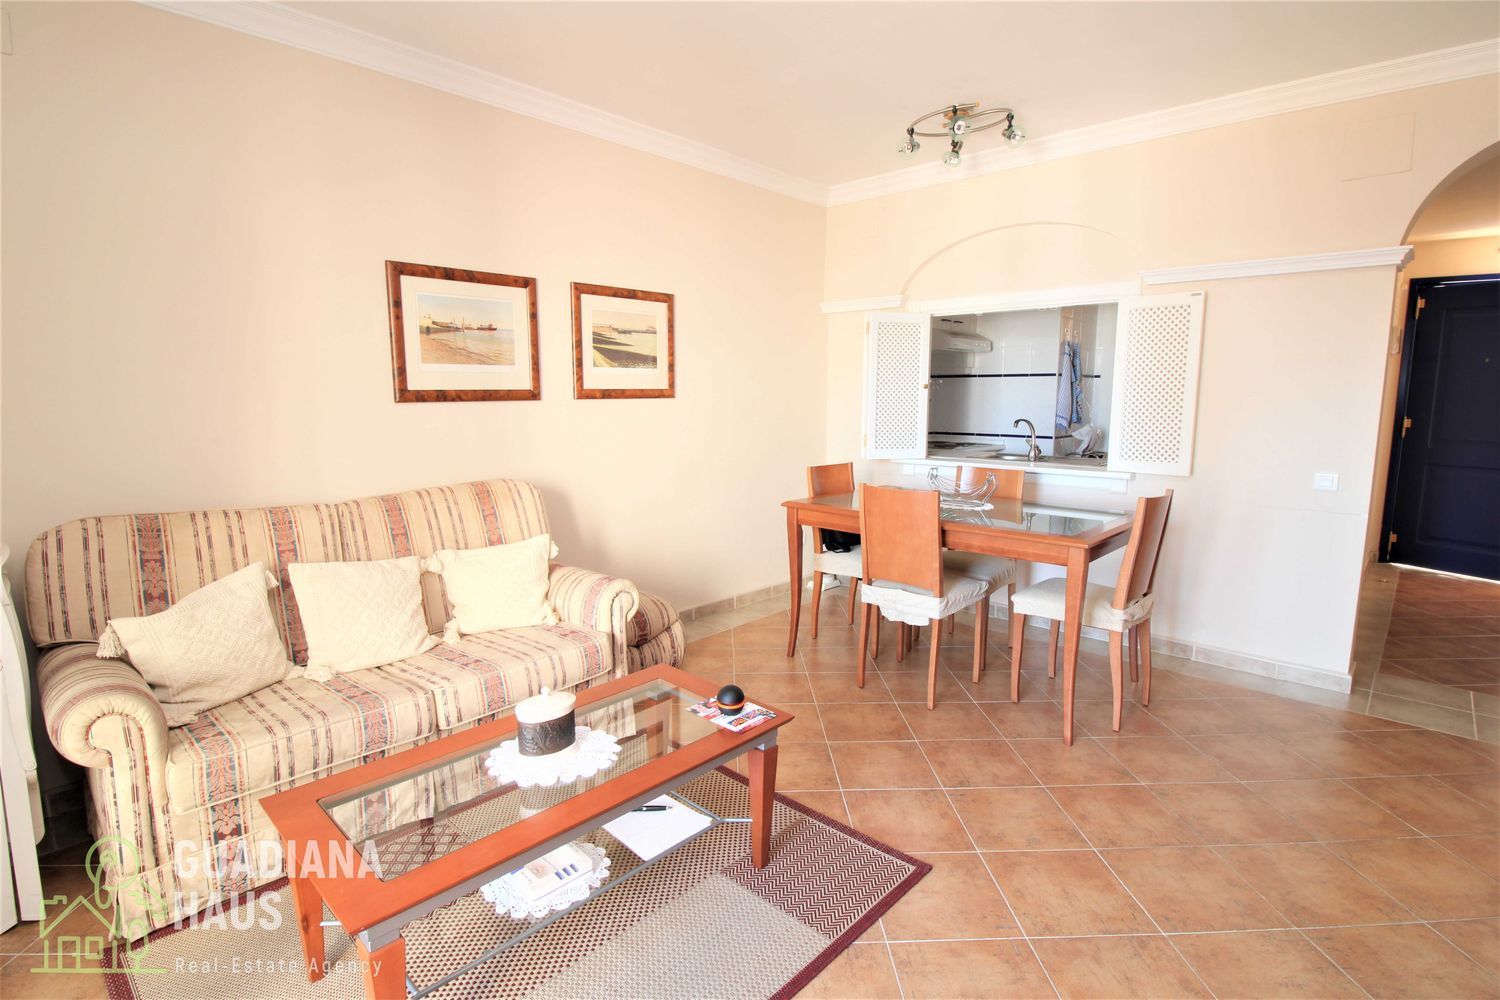 Apartment for sale on the seafront on Calle Robalito, in Isla Canela